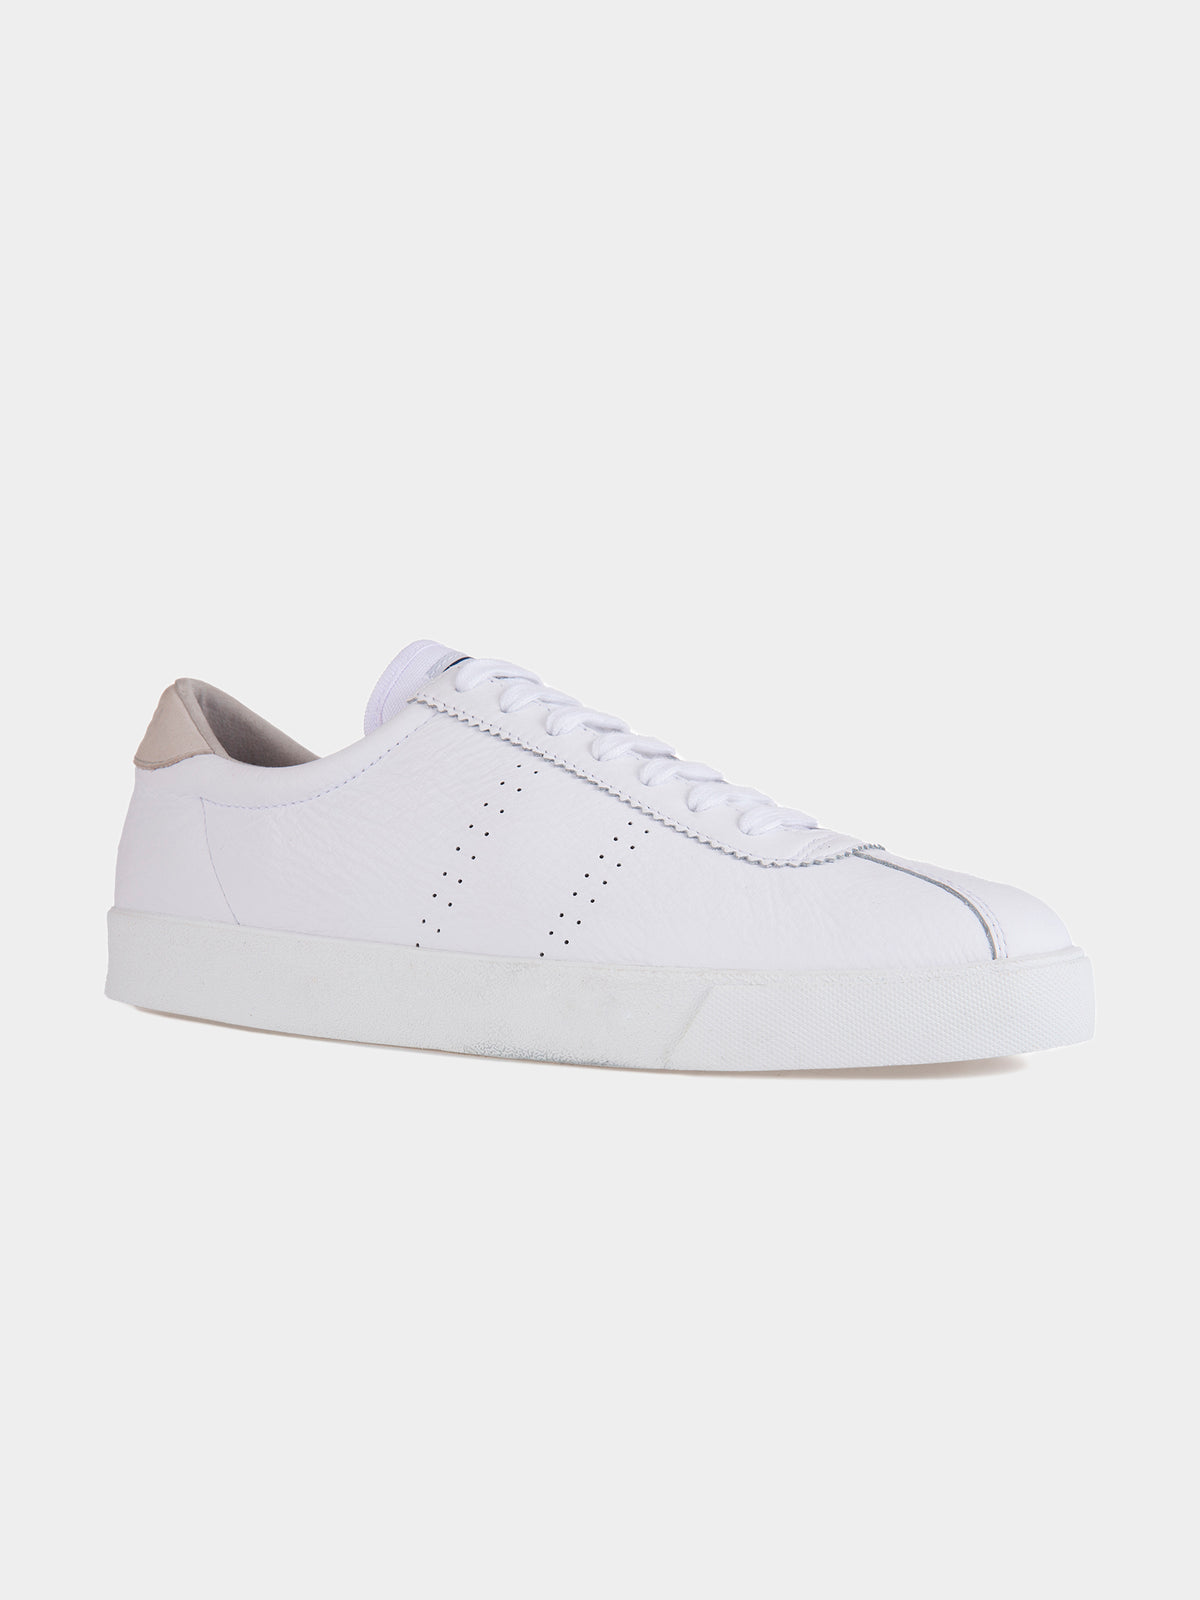 Unisex 2843 Club S Comfort Leather Sneakers in White &amp; Grey Sand